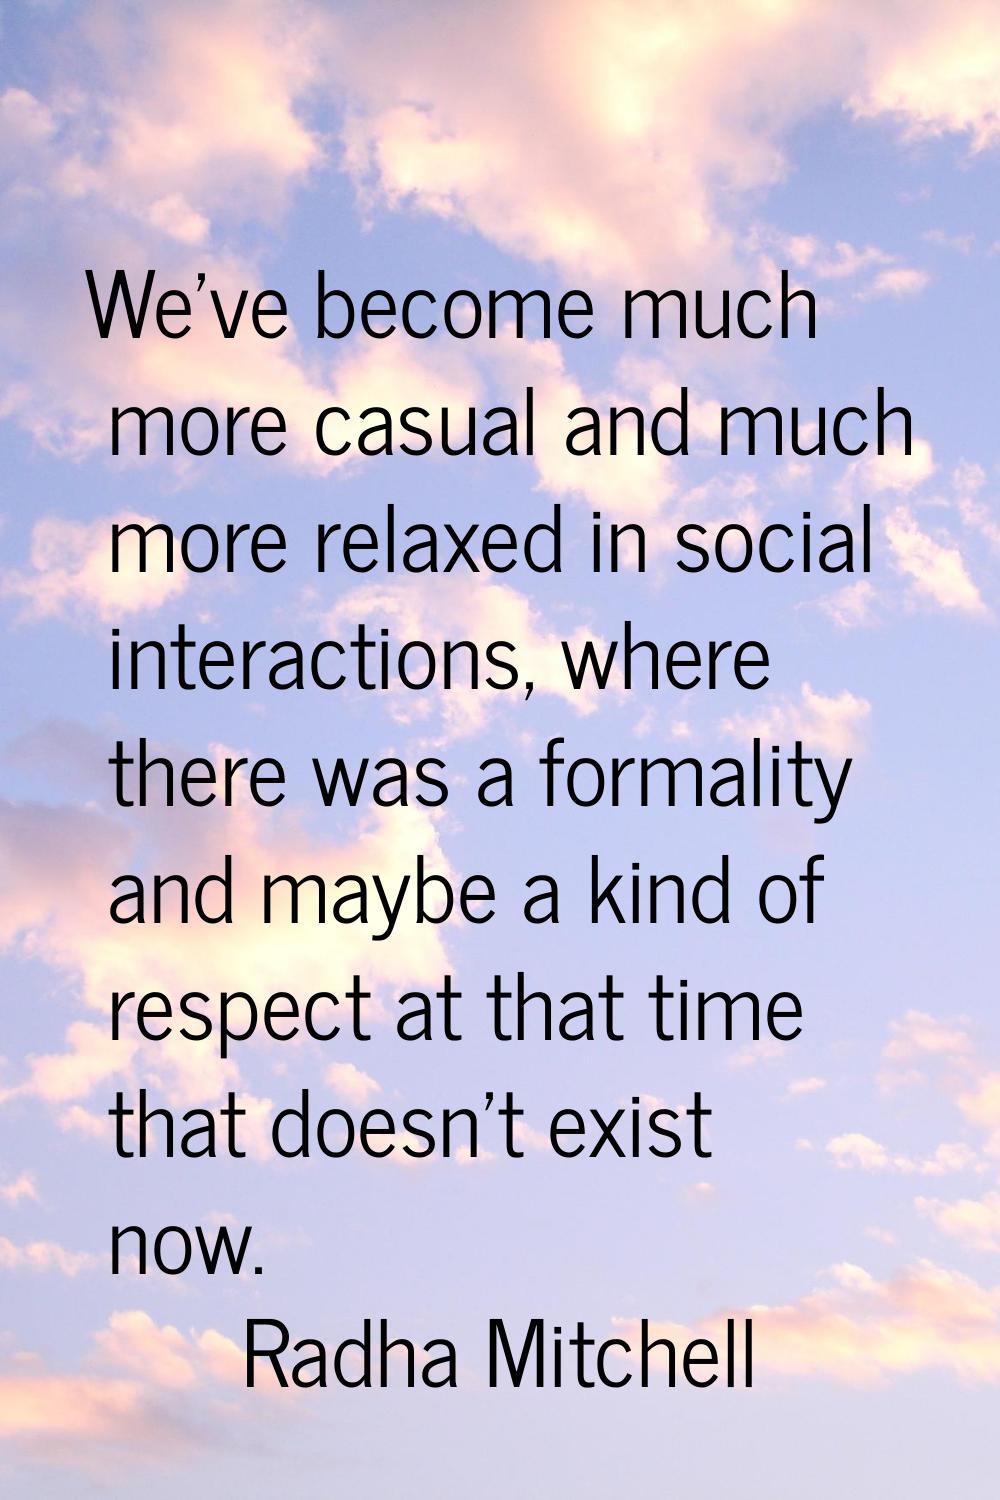 We've become much more casual and much more relaxed in social interactions, where there was a forma